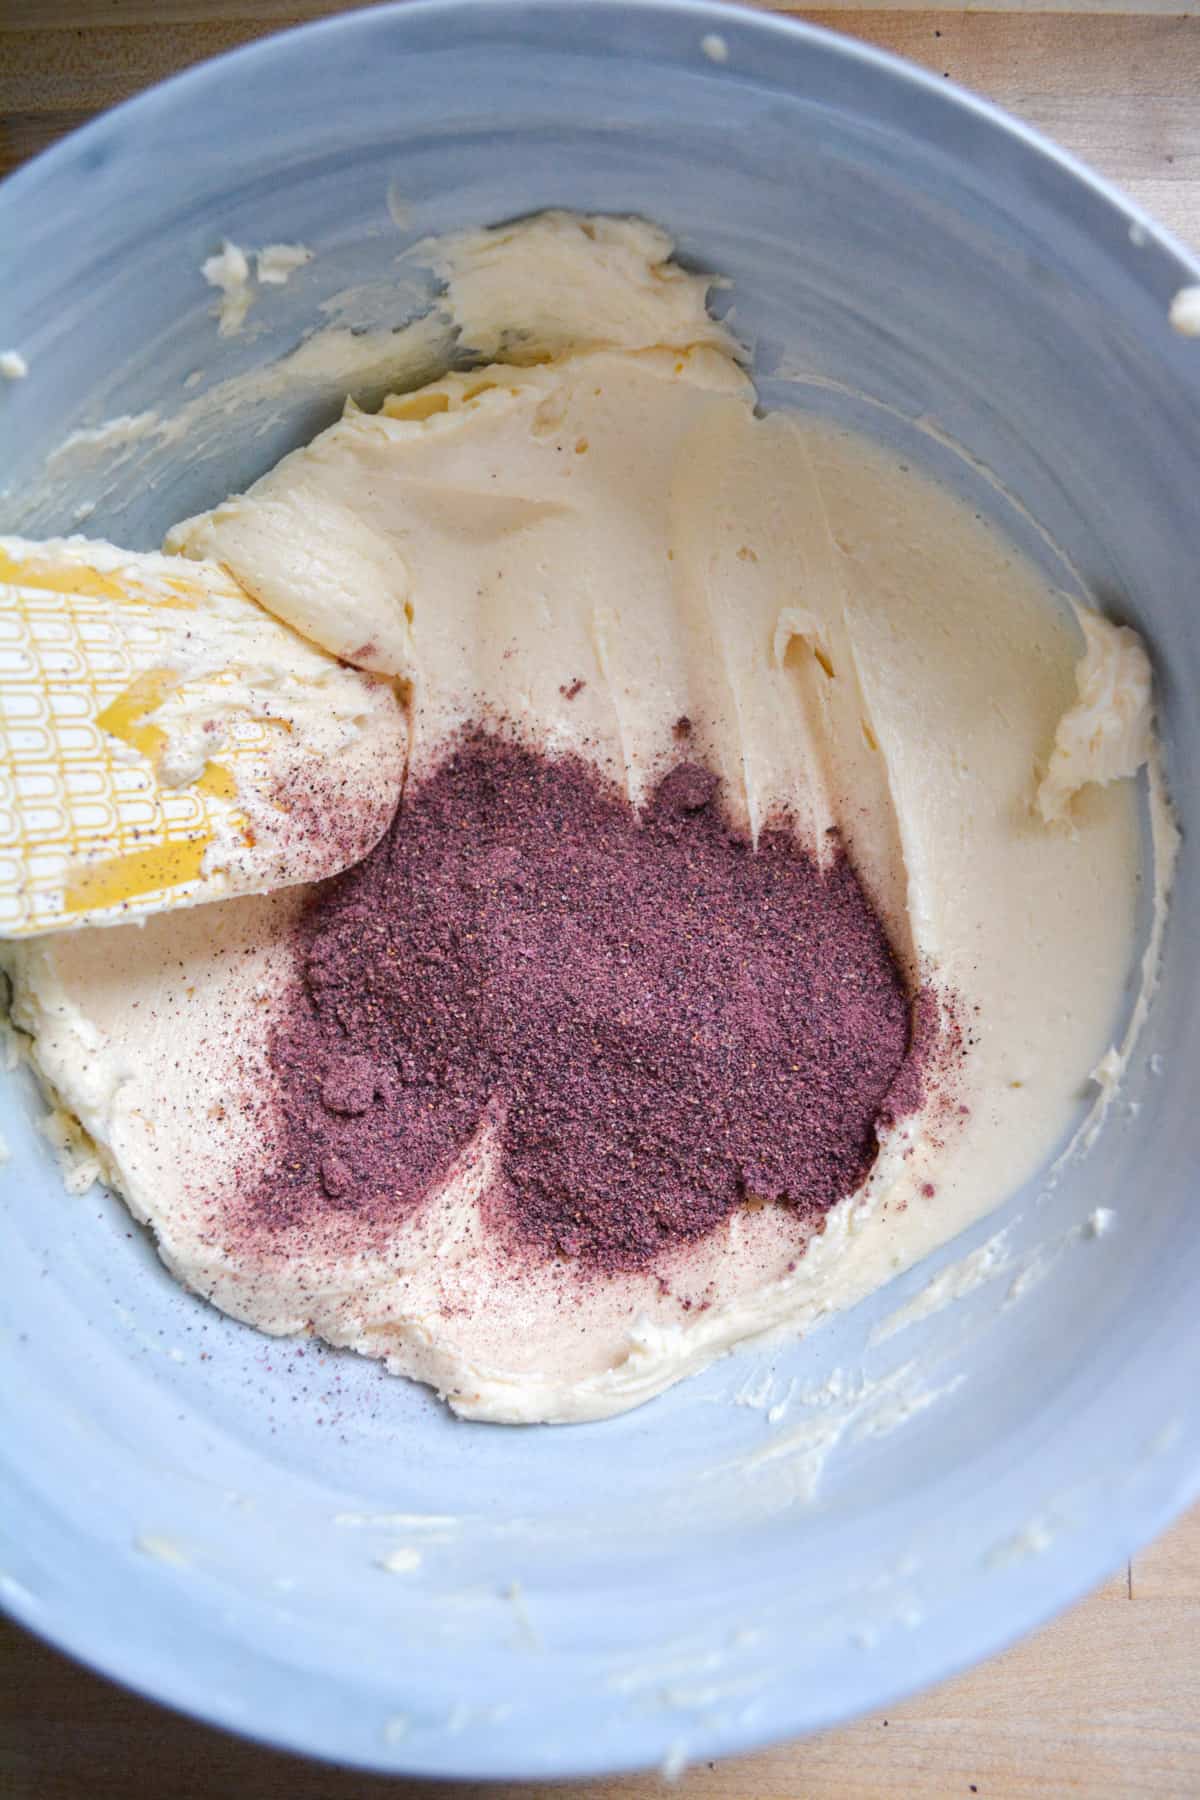 Sifted freeze dried blueberries added into the creamed butter.